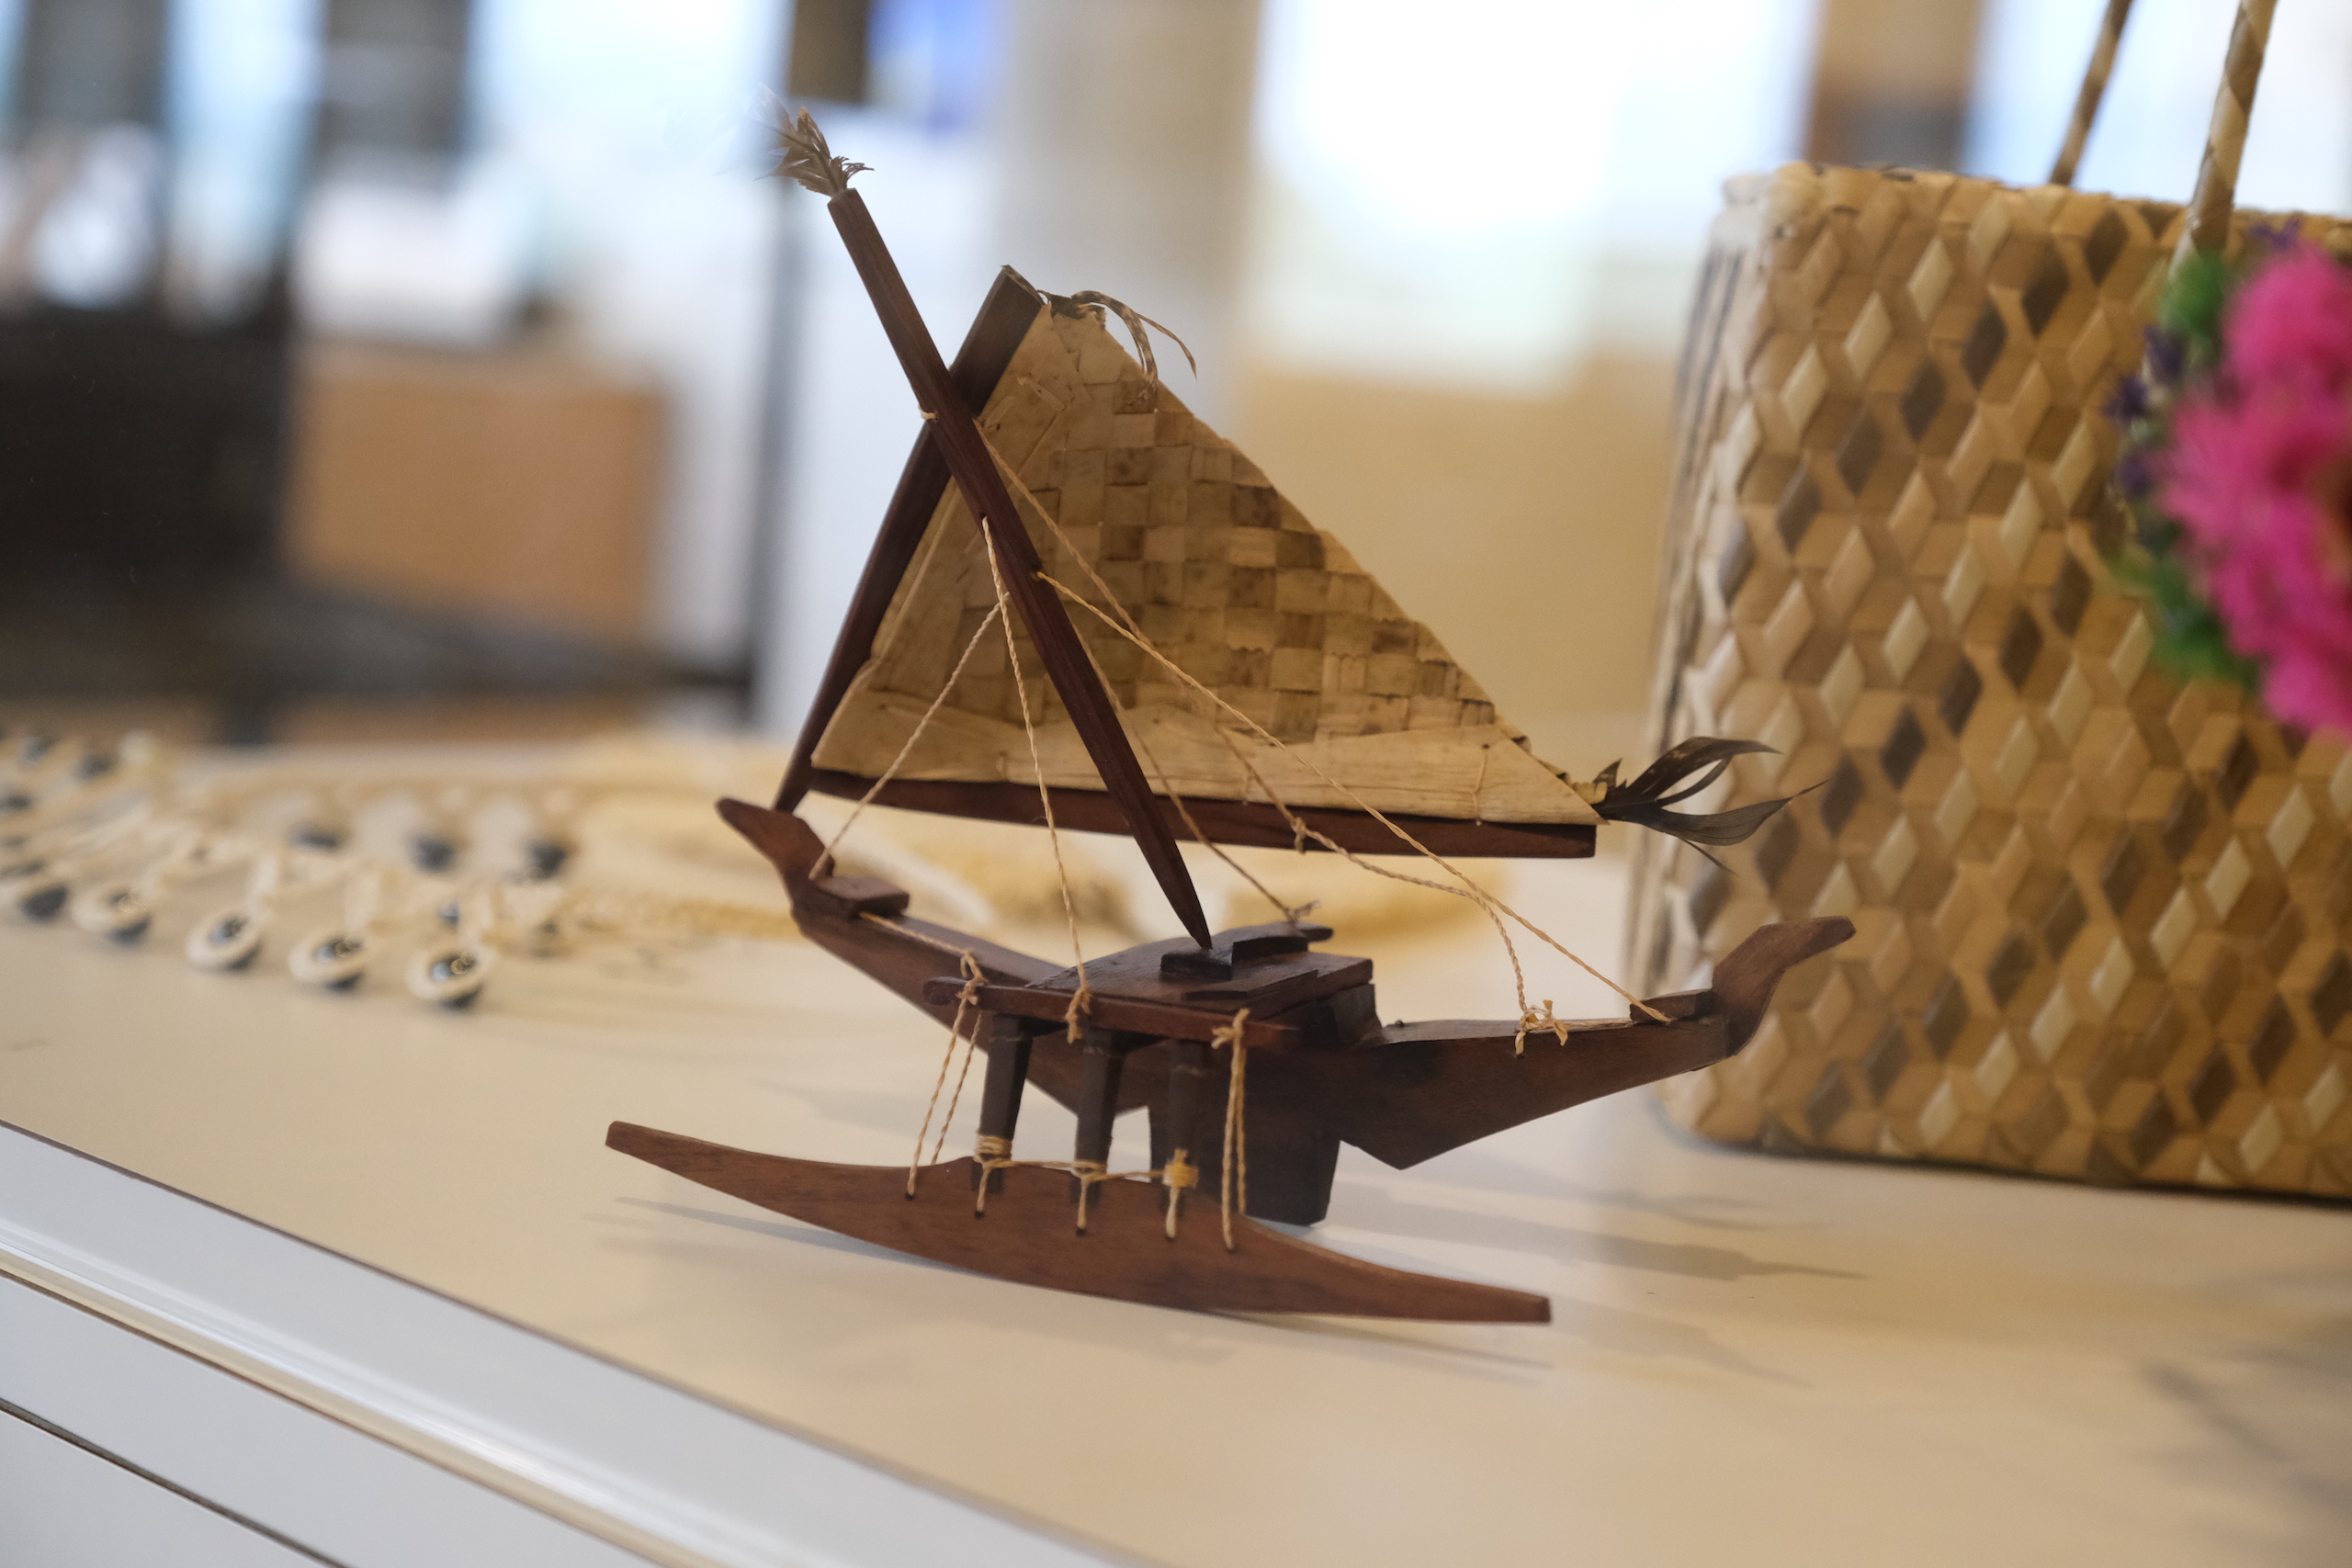 Wooden carving of a miniature canoe.